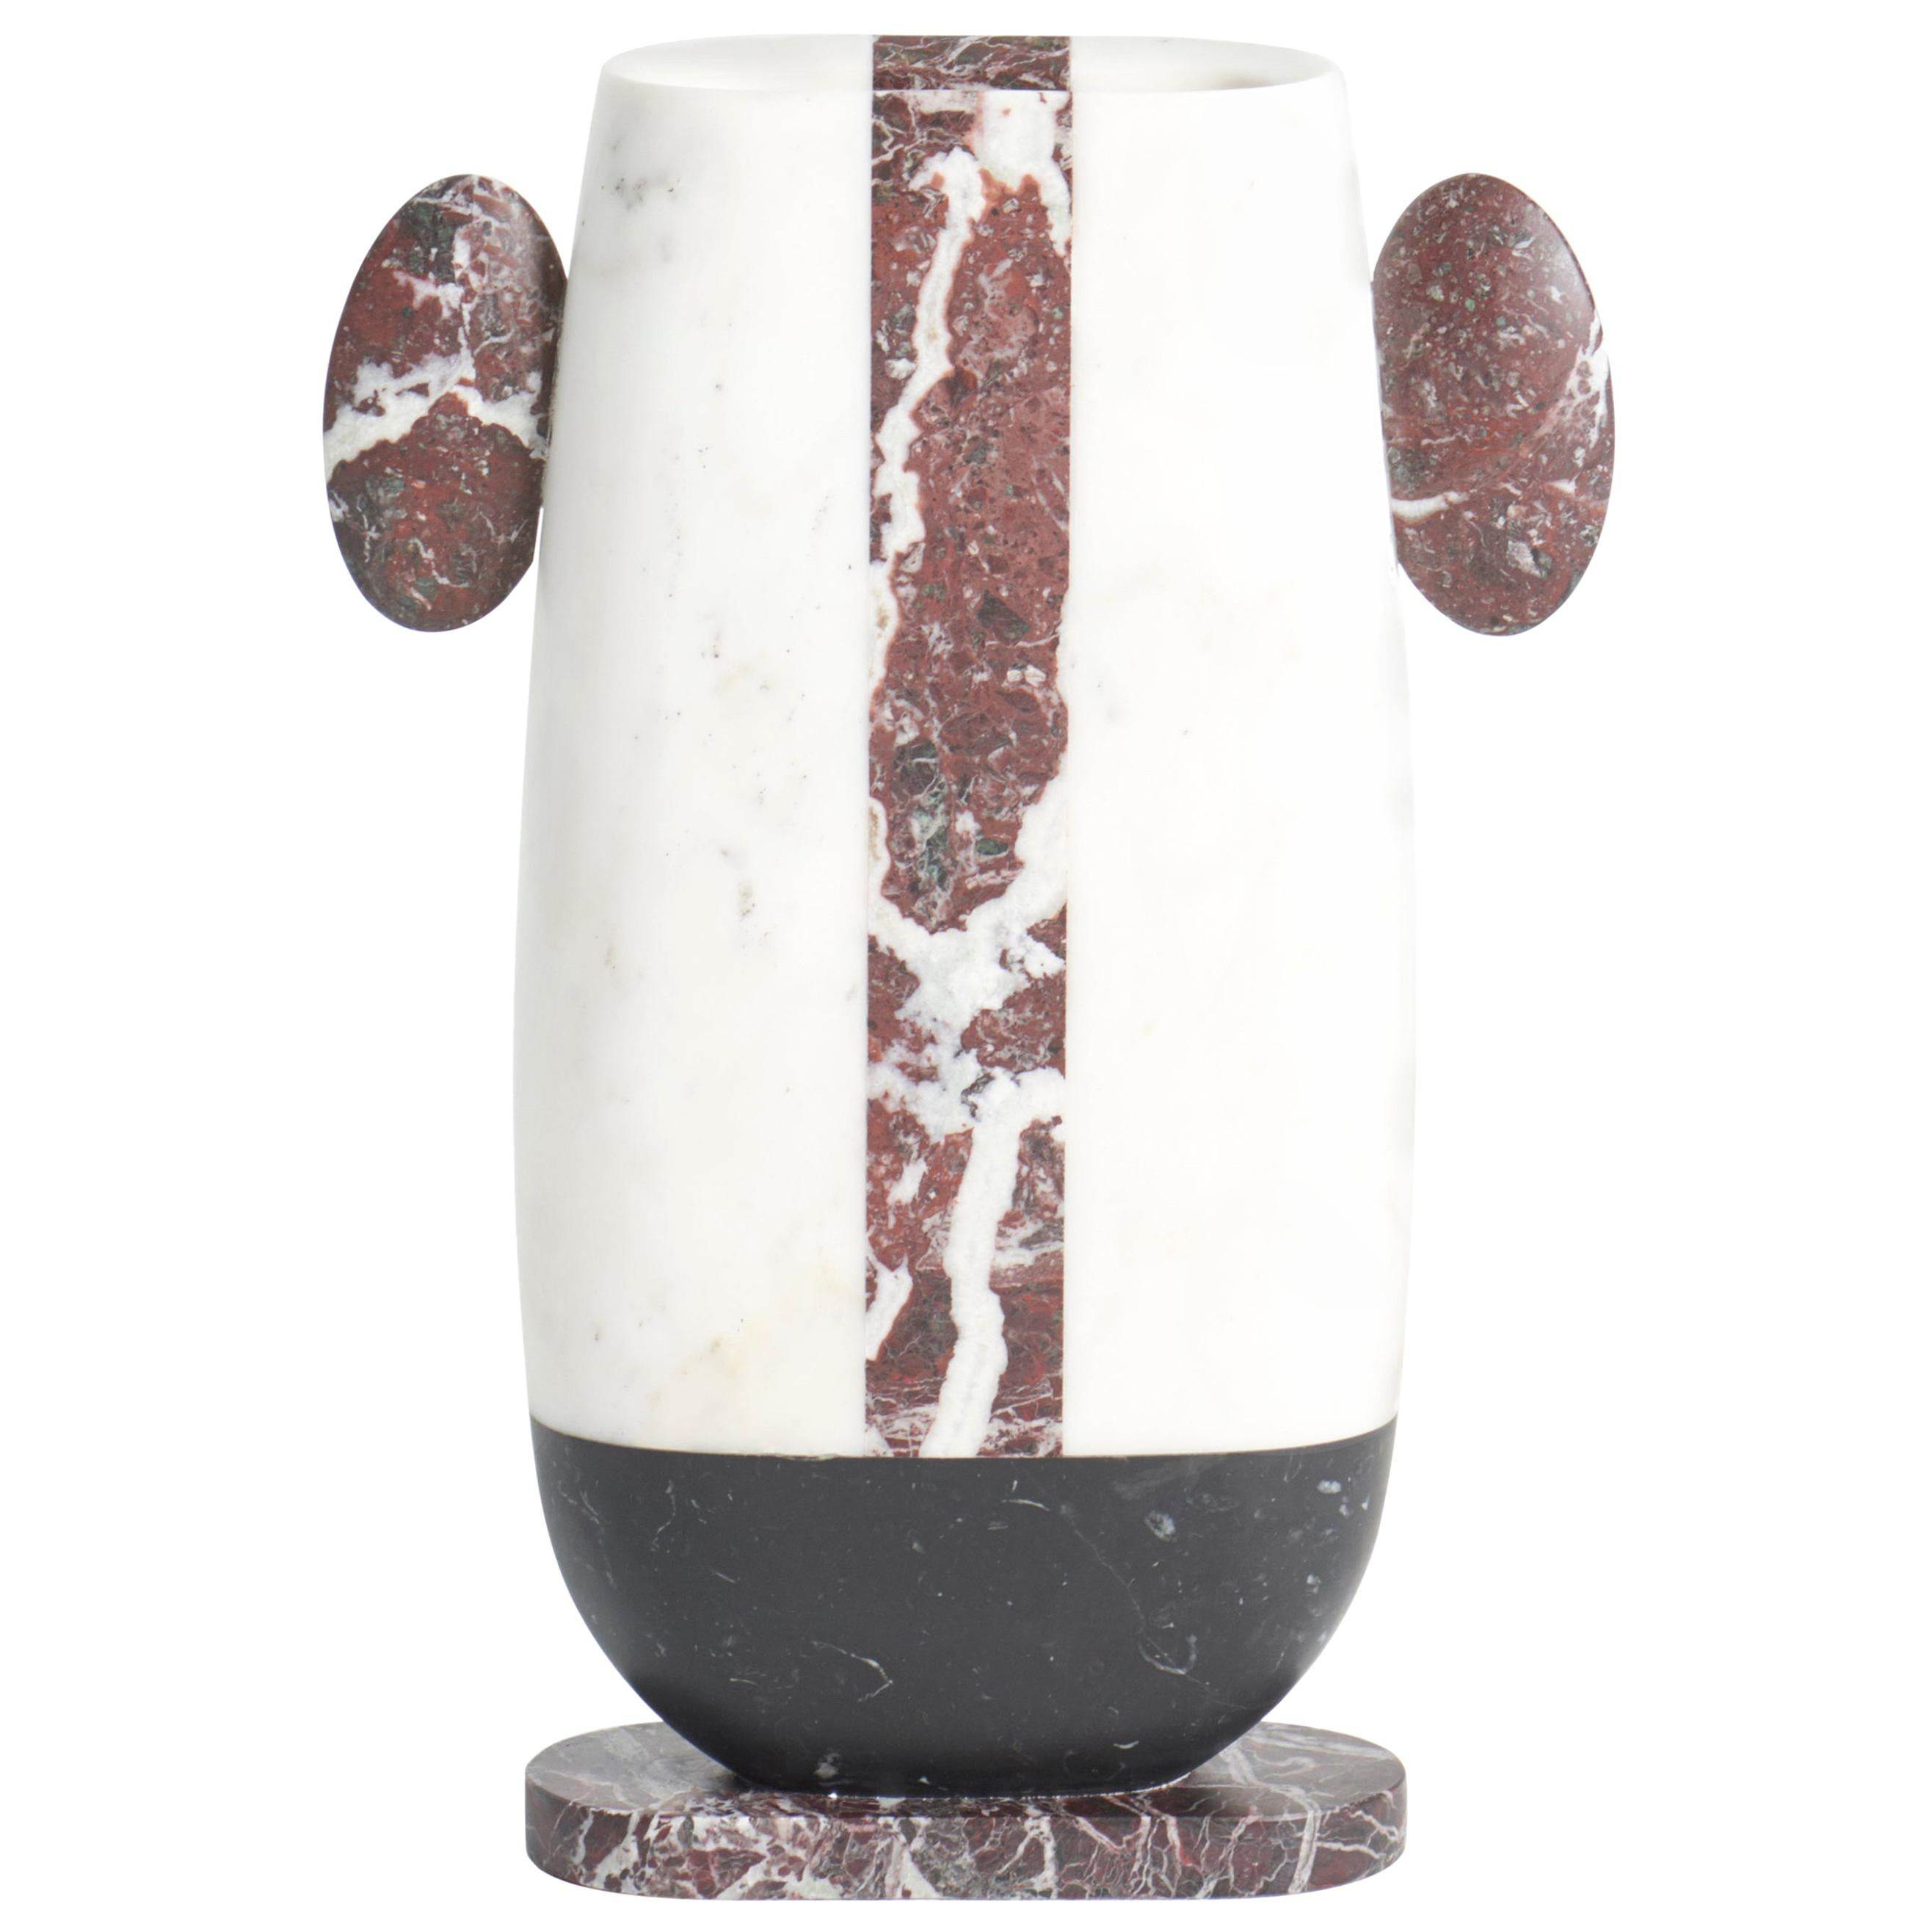 New Modern Vase in White, Black and Red Marbles, creator Matteo Cibic Stock For Sale